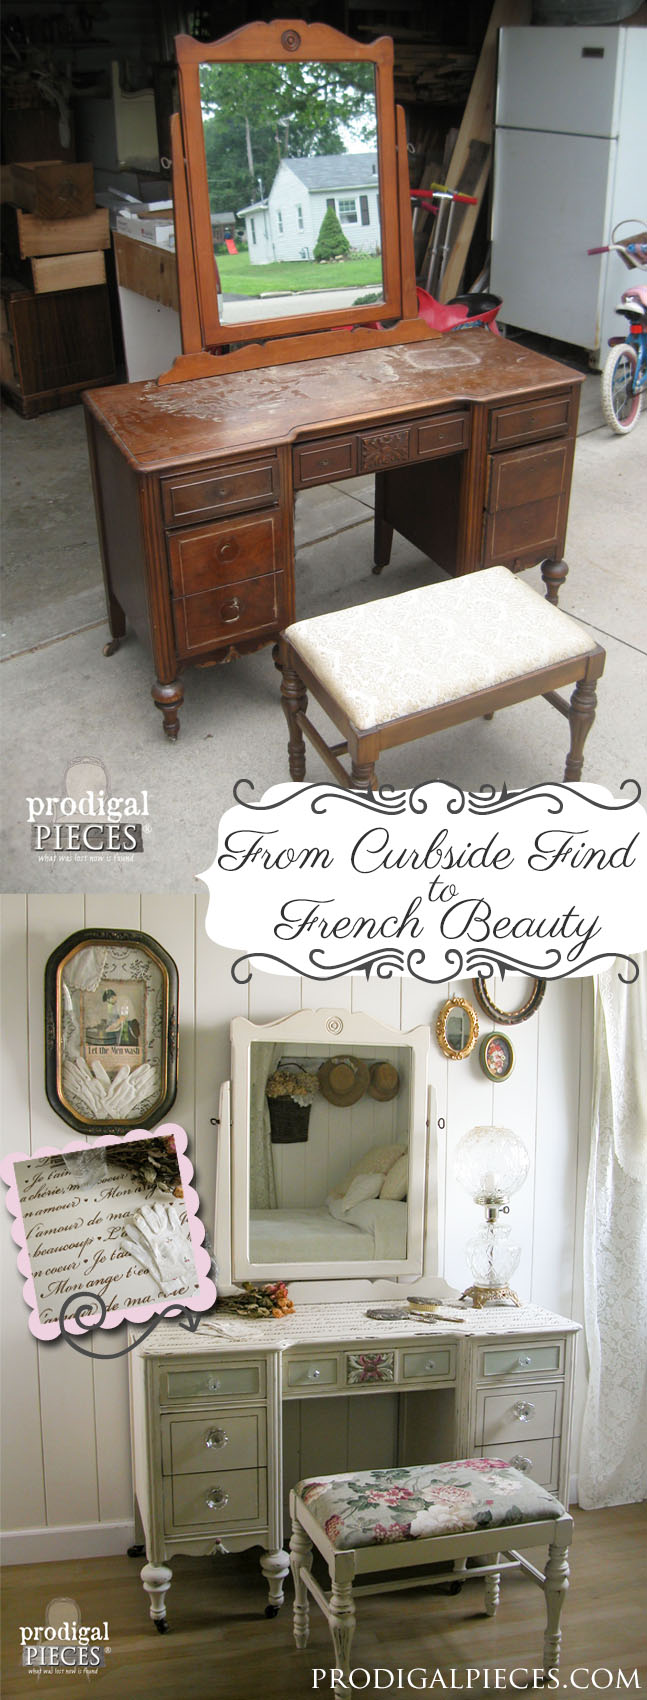 Antique Vanity Left for the Trash Gets French Makeover | Prodigal Pieces | www.prodigalpieces.com